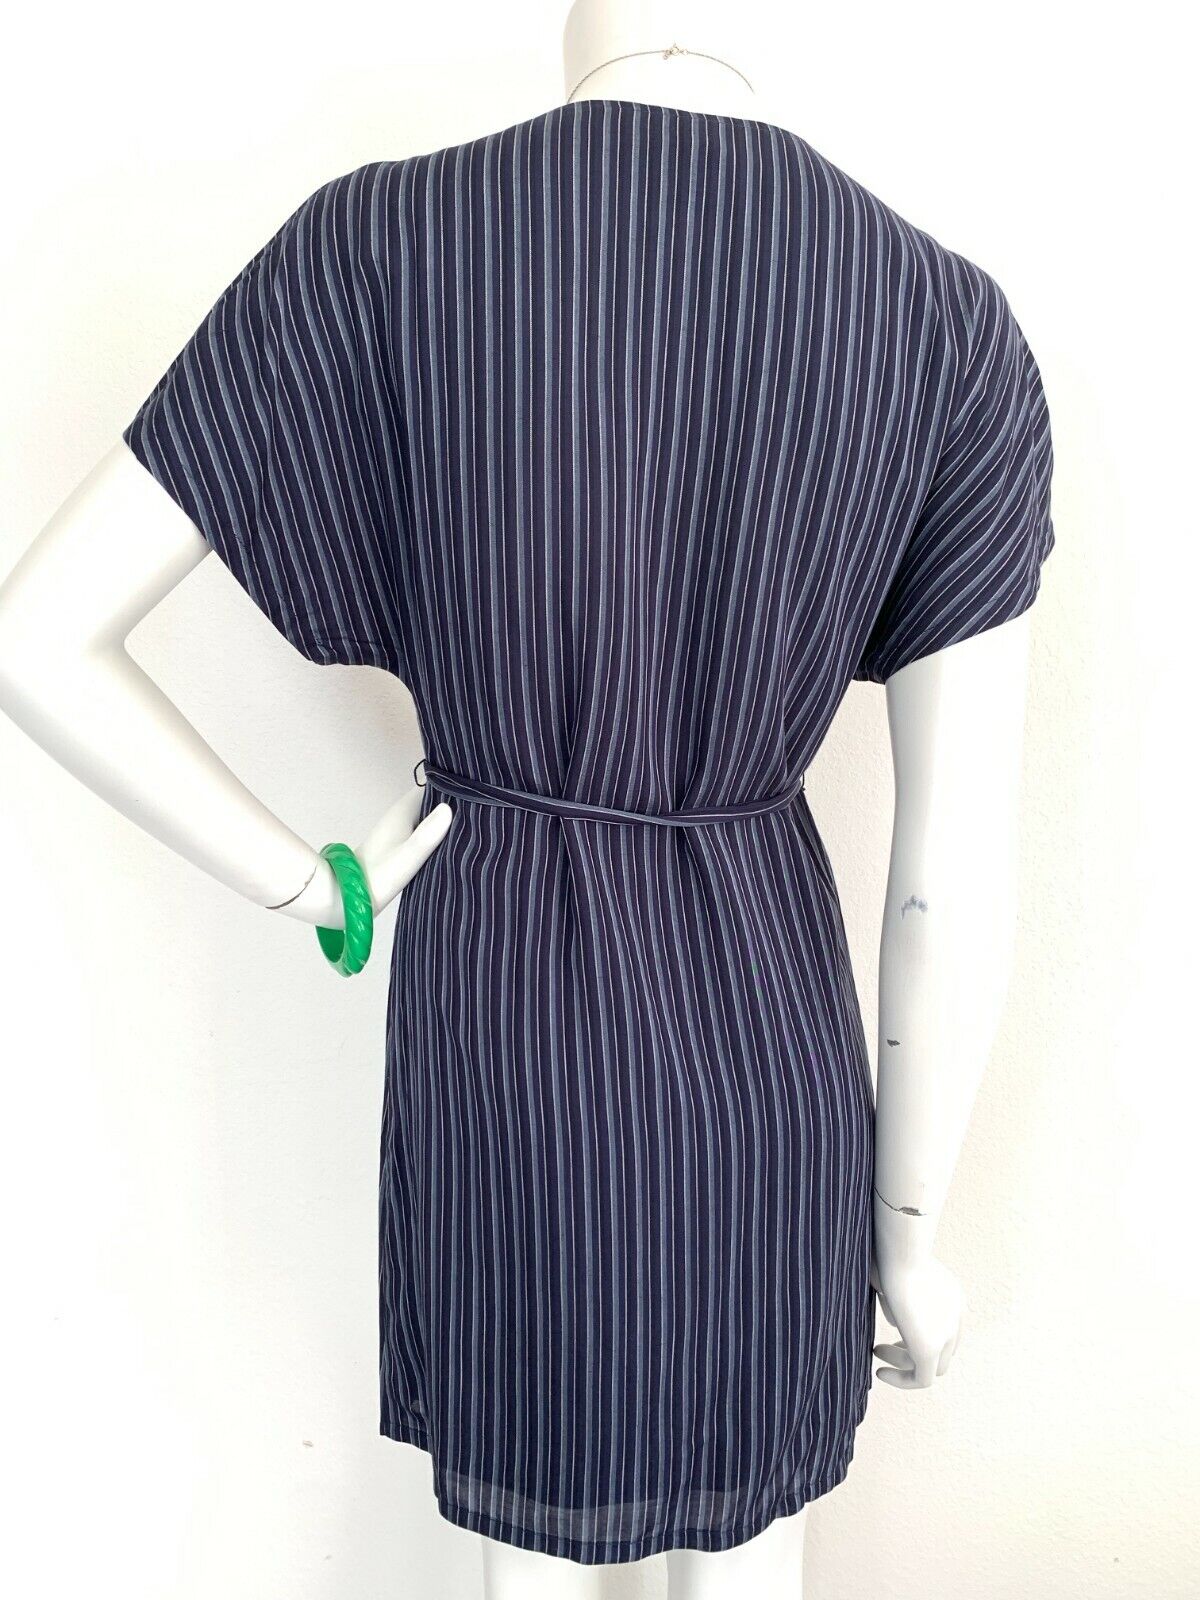 Cherelle striped dress from Paige Rich, size M